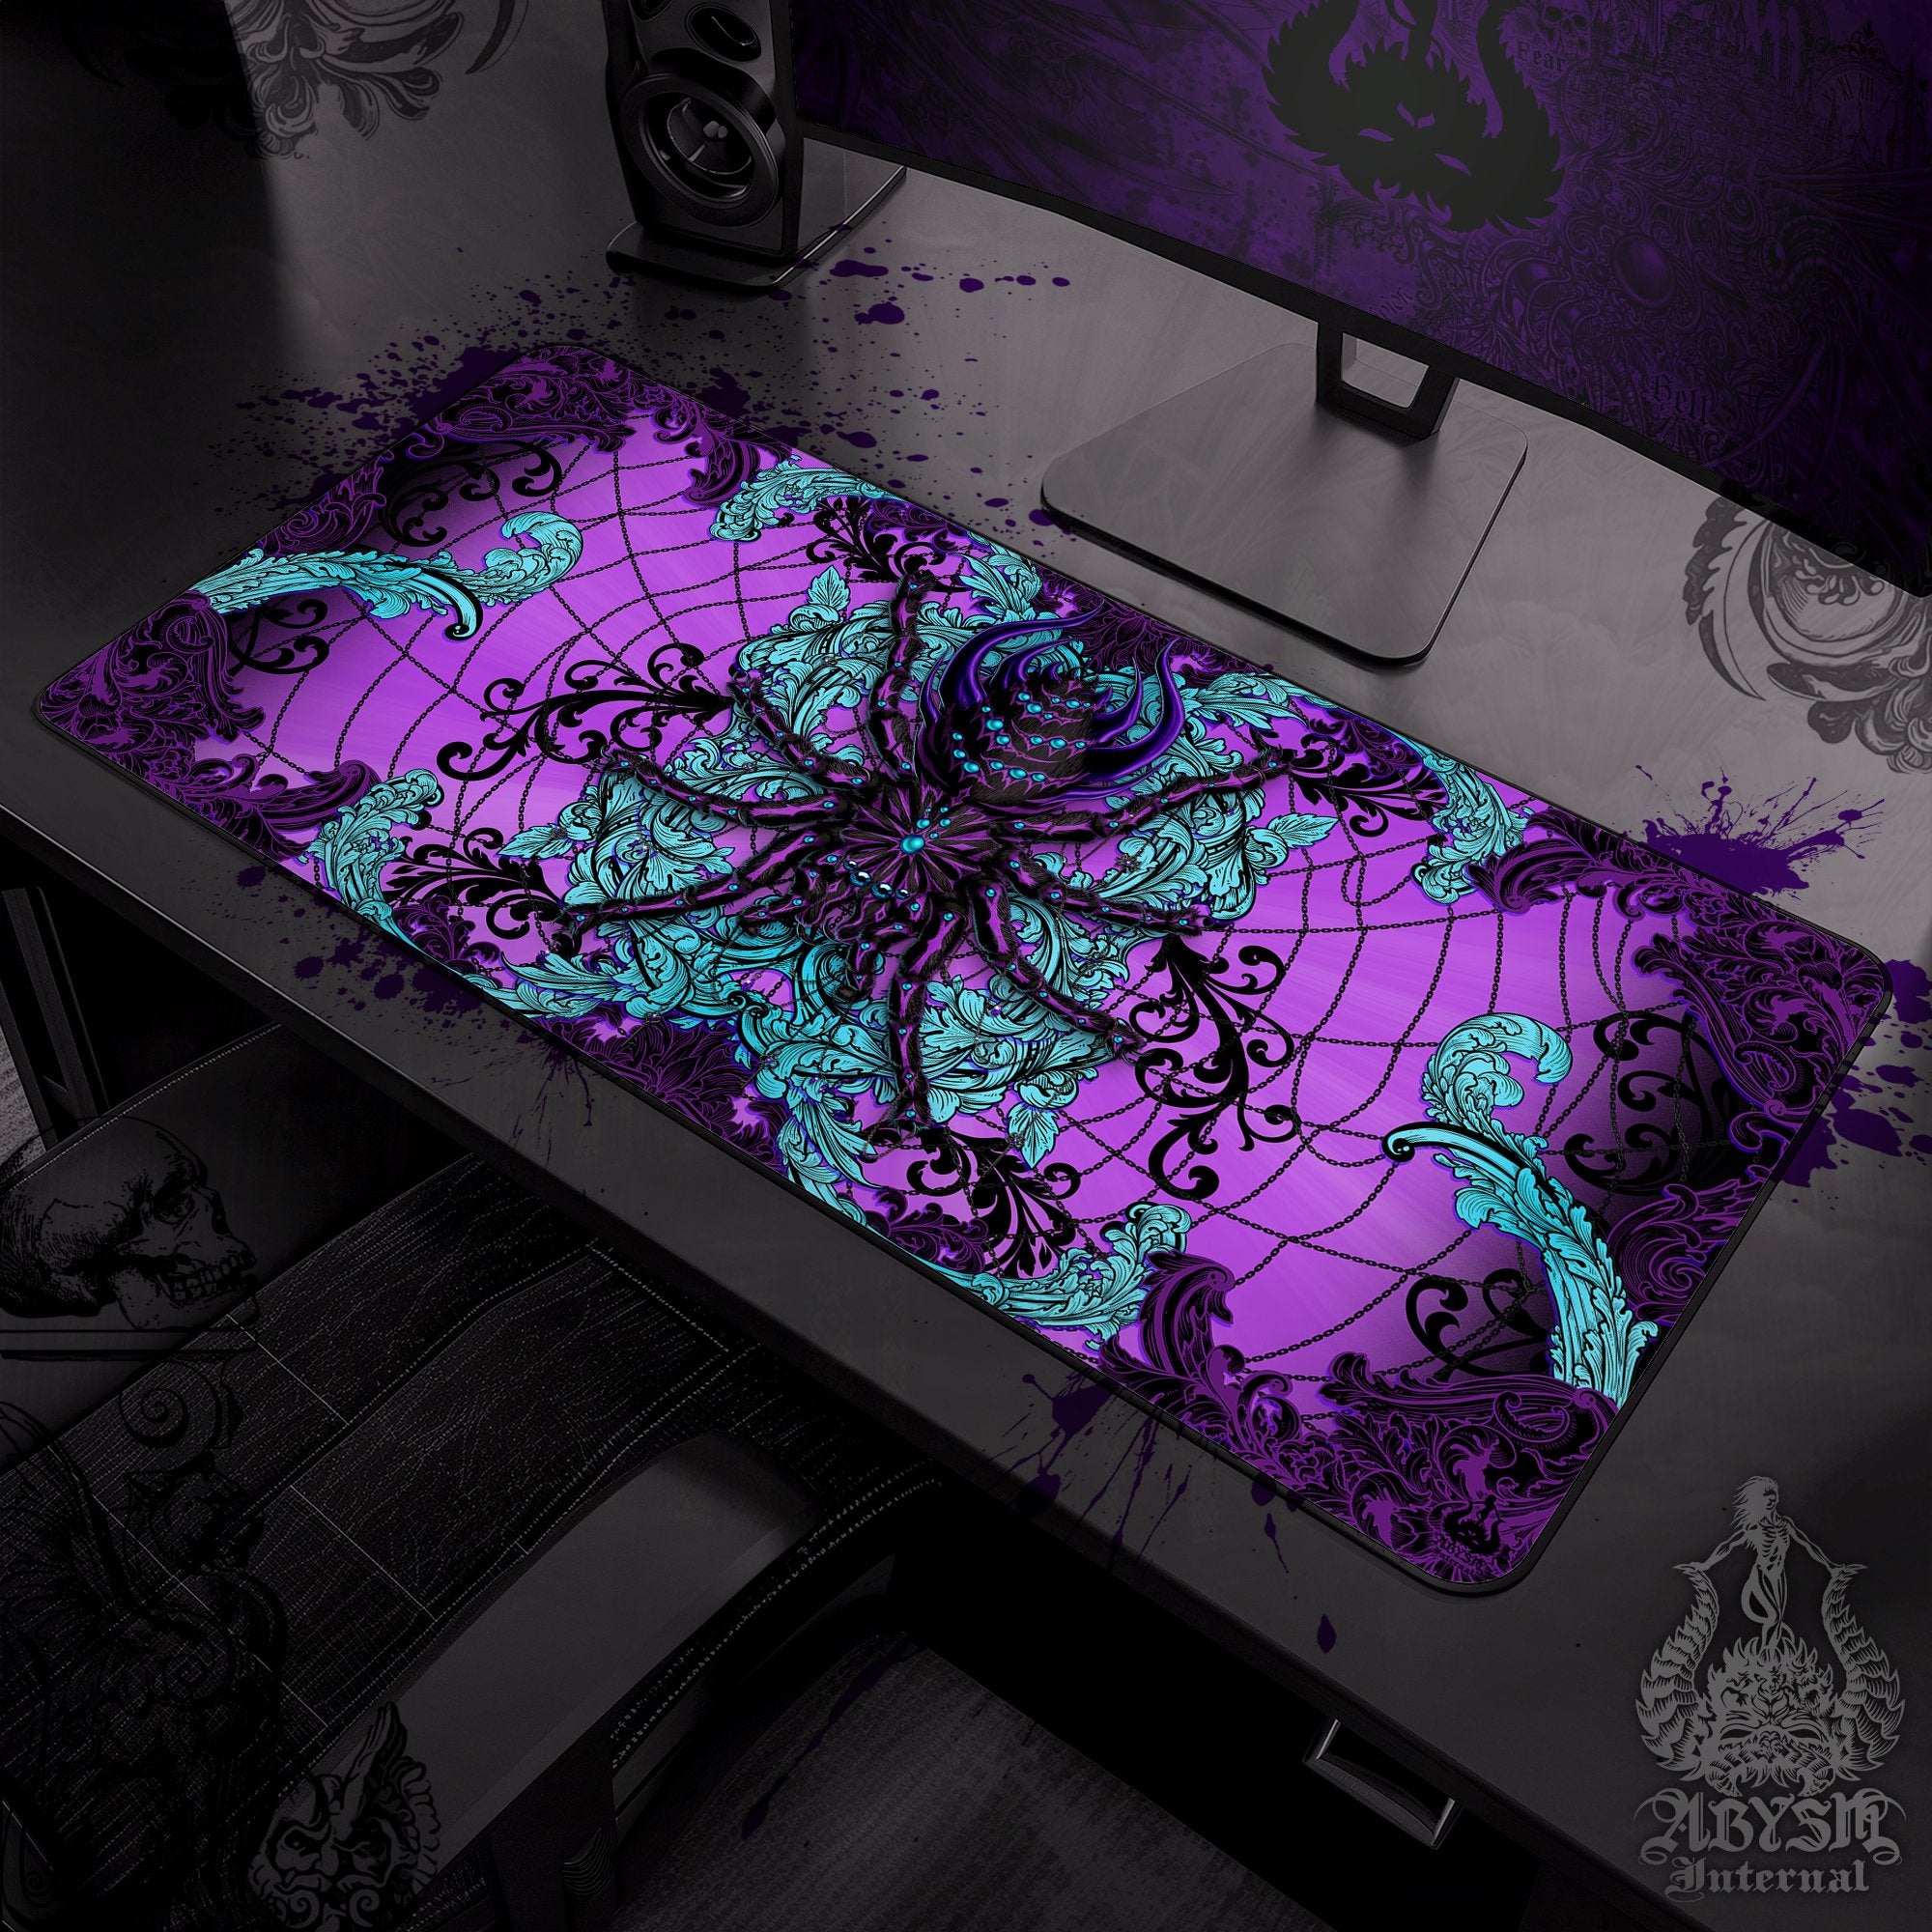 Pastel Goth Desk Mat, Spider Gaming Mouse Pad, Witchy Gamer Table Protector Cover, Tarantula Workpad, Whimsigoth Art Print - Black Purple - Abysm Internal